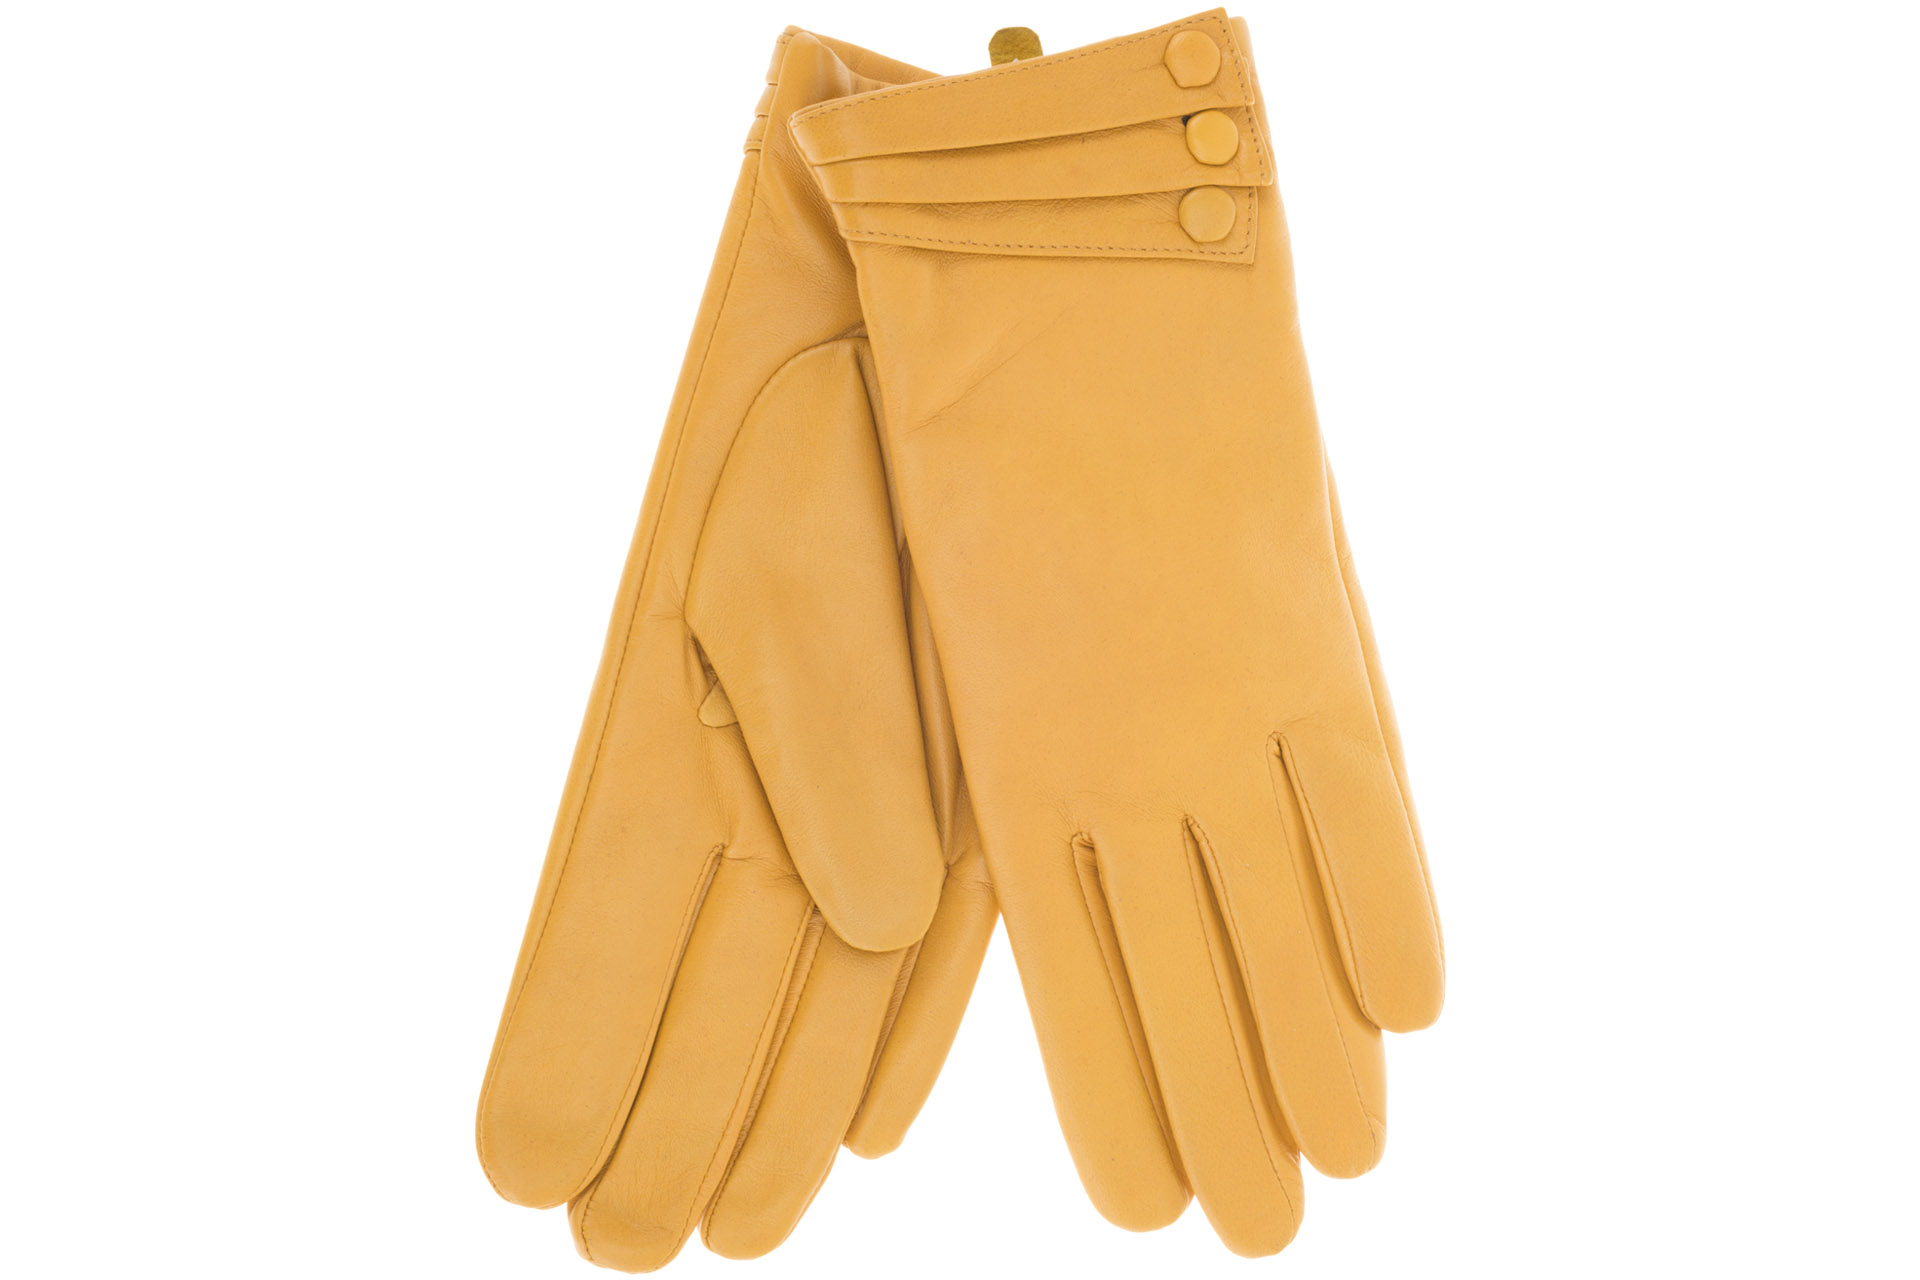 PHOTOS OF LEATHER GLOVES